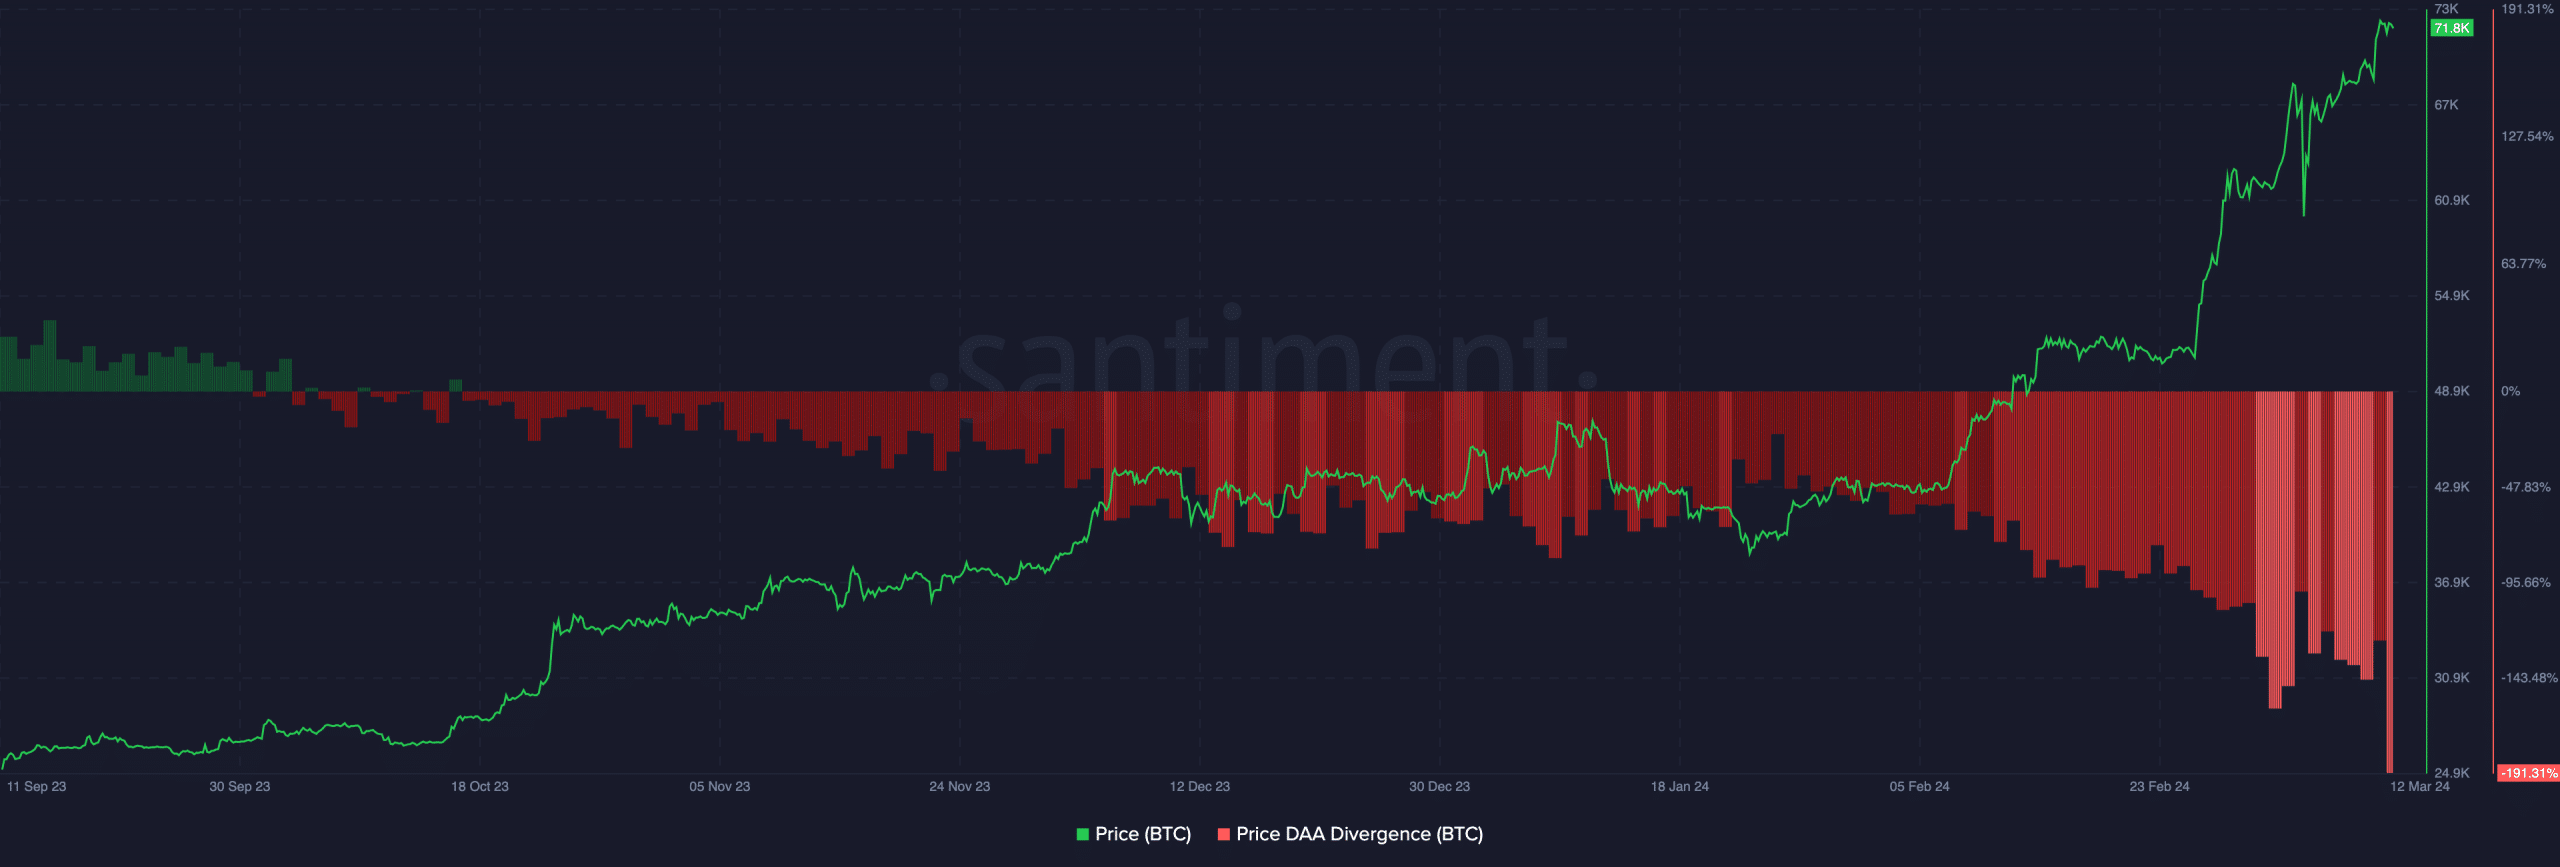 on-chain data showing the relationship between Bitcoin's price and DAA